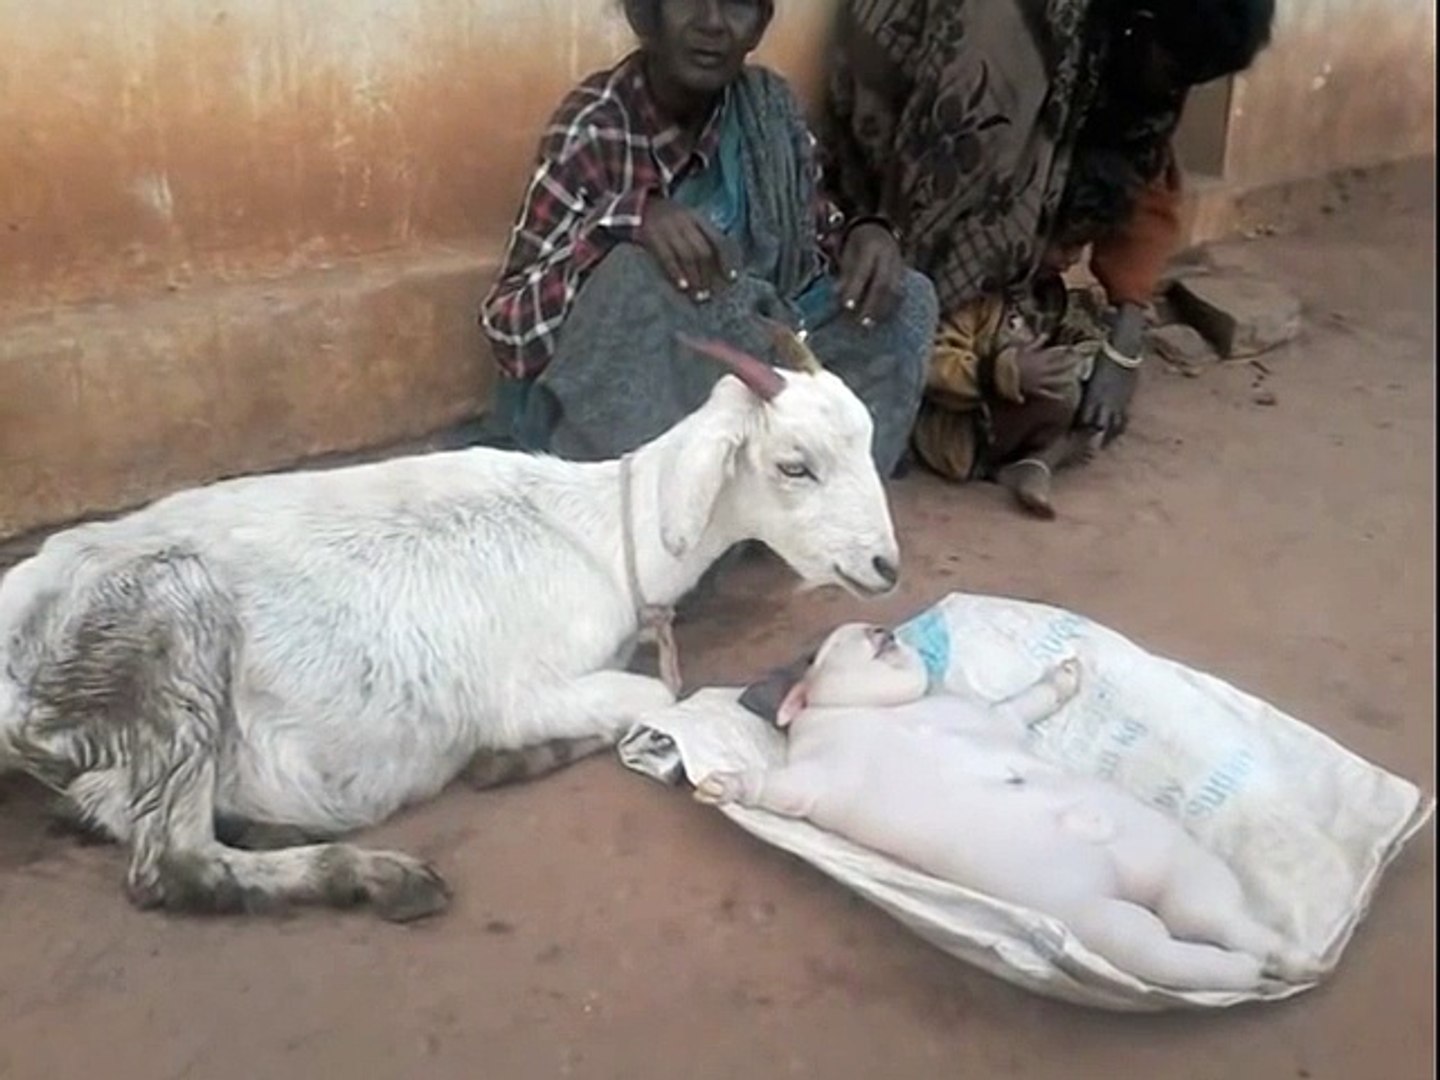 Goat Gives Birth To Human Looks Like BABY in India Mysore Exclusive - Dailymotion